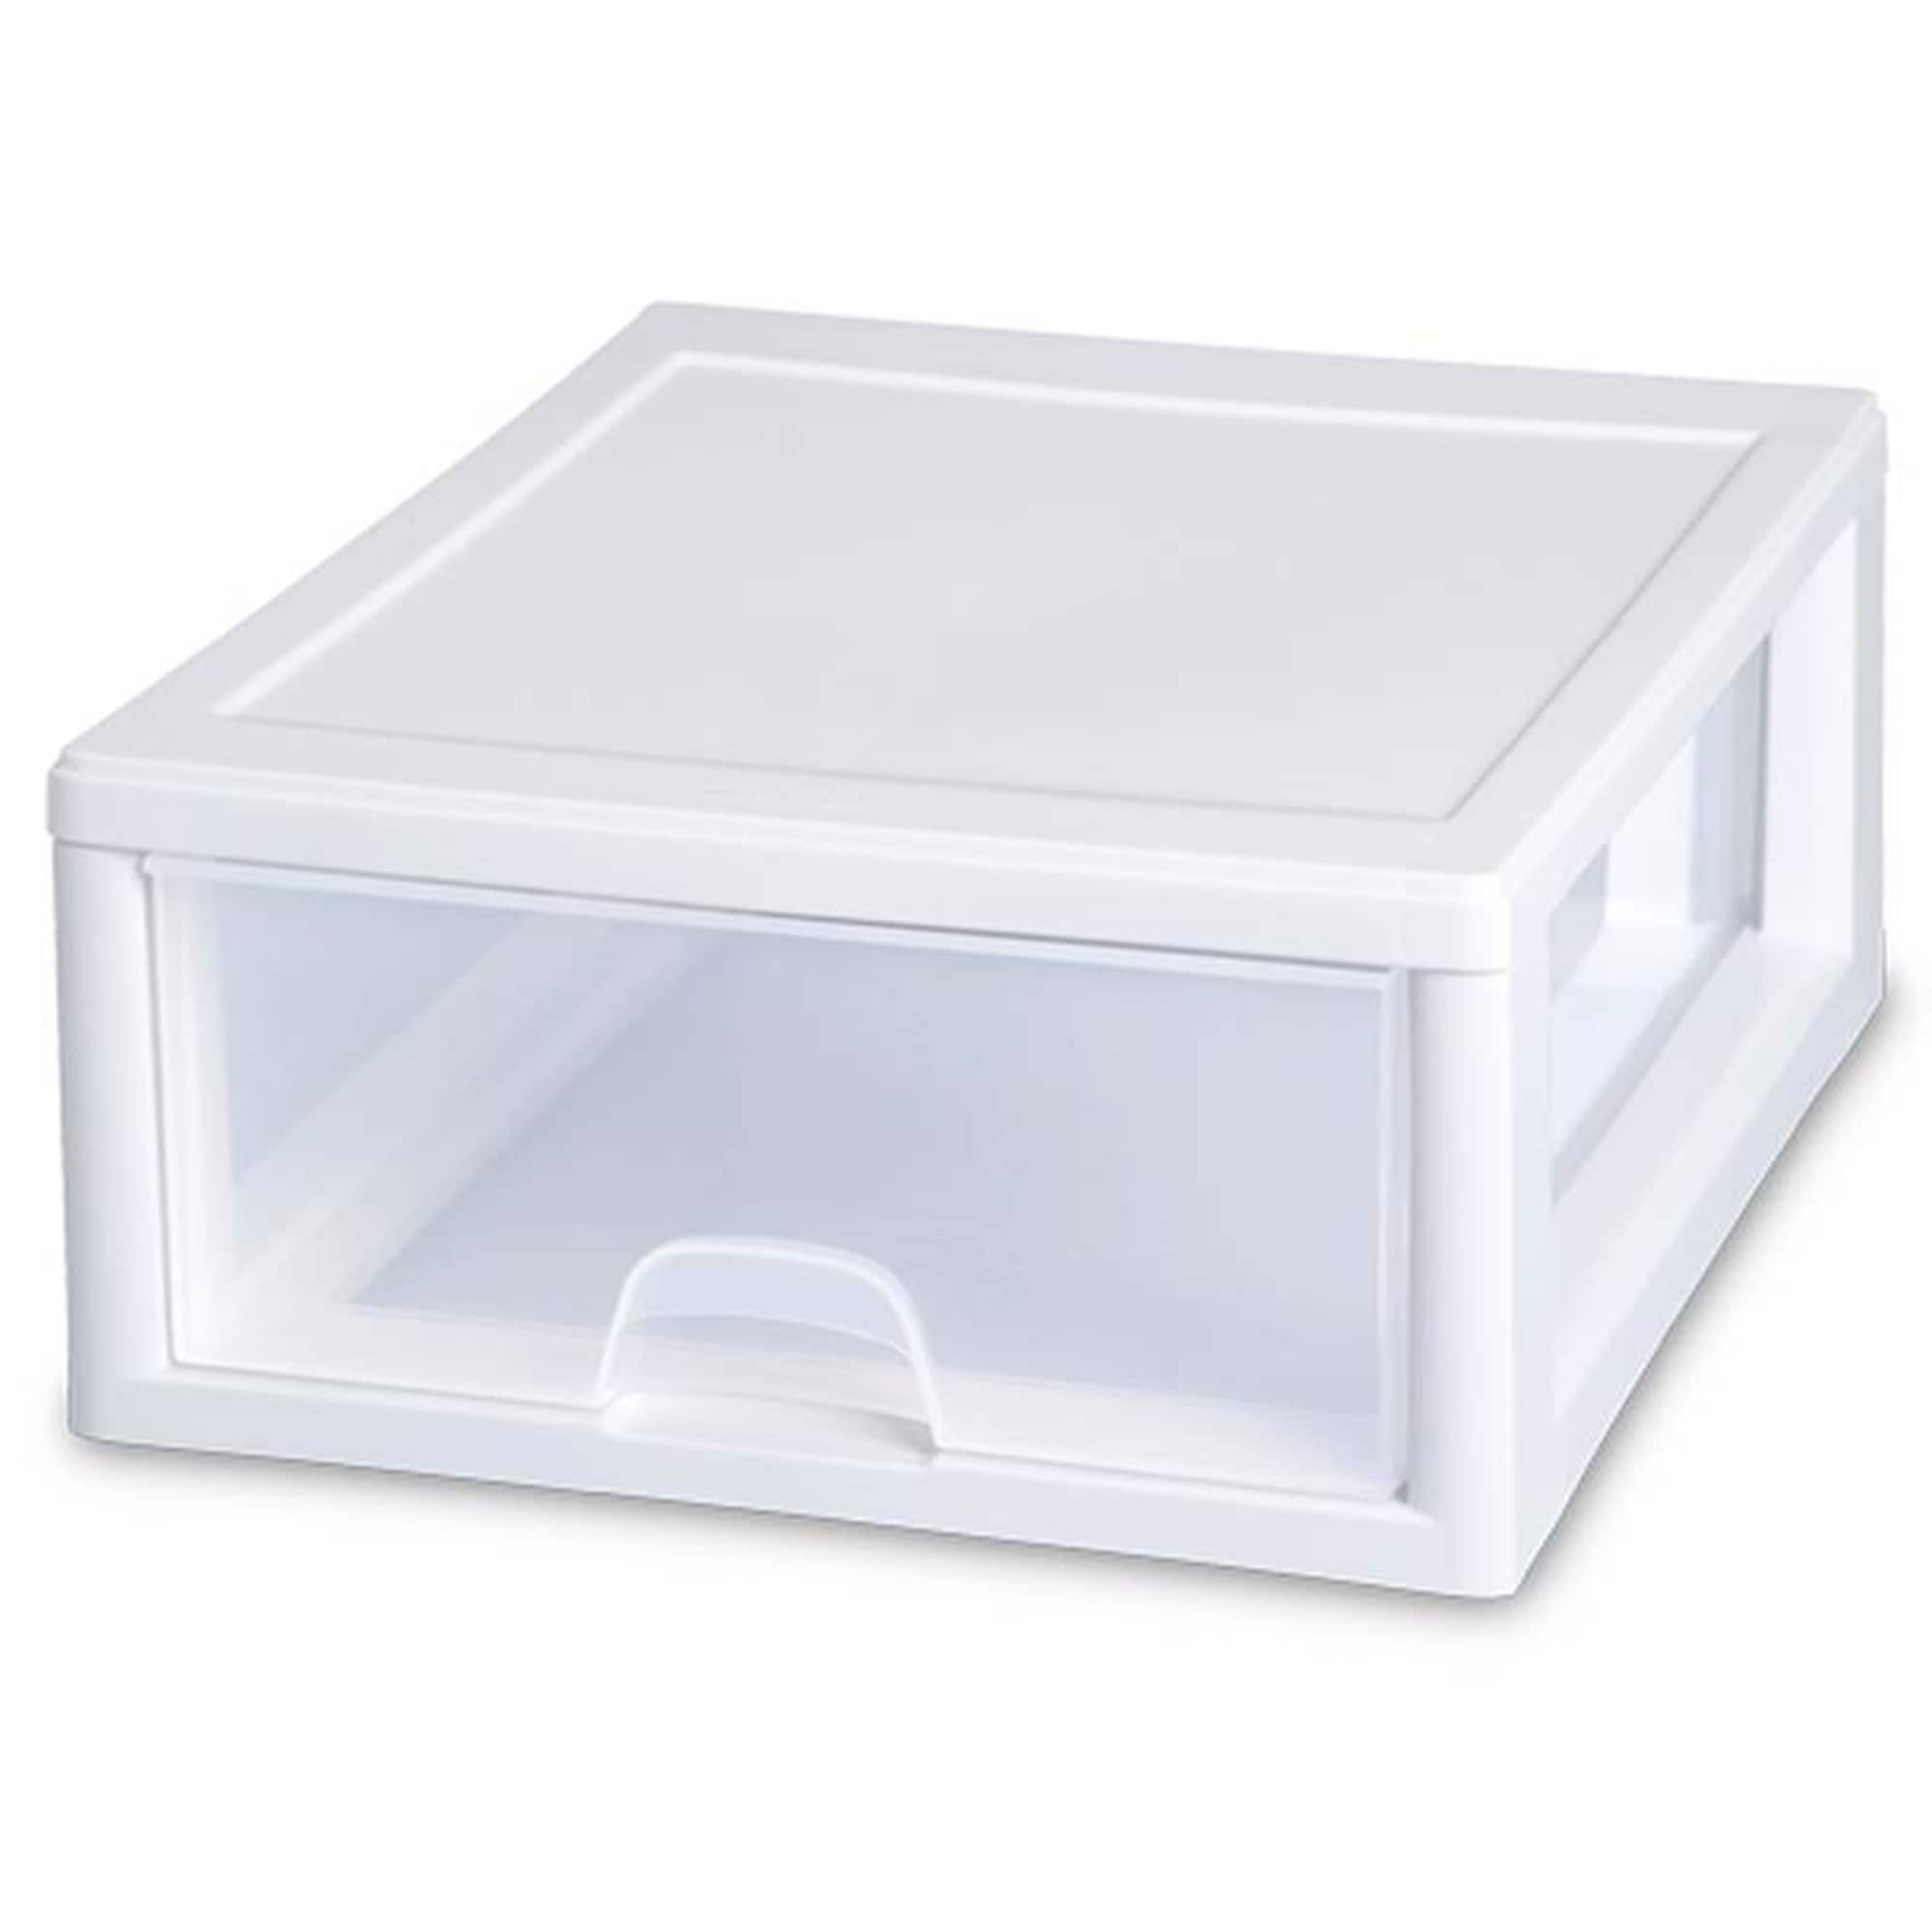 https://ak1.ostkcdn.com/images/products/is/images/direct/b22aeaa85ba508967a52952cf187926b2a024b9d/Sterilite-16-Qt-Single-Box-Modular-Stacking-Storage-Drawer-Container-%2824-Pack%29.jpg